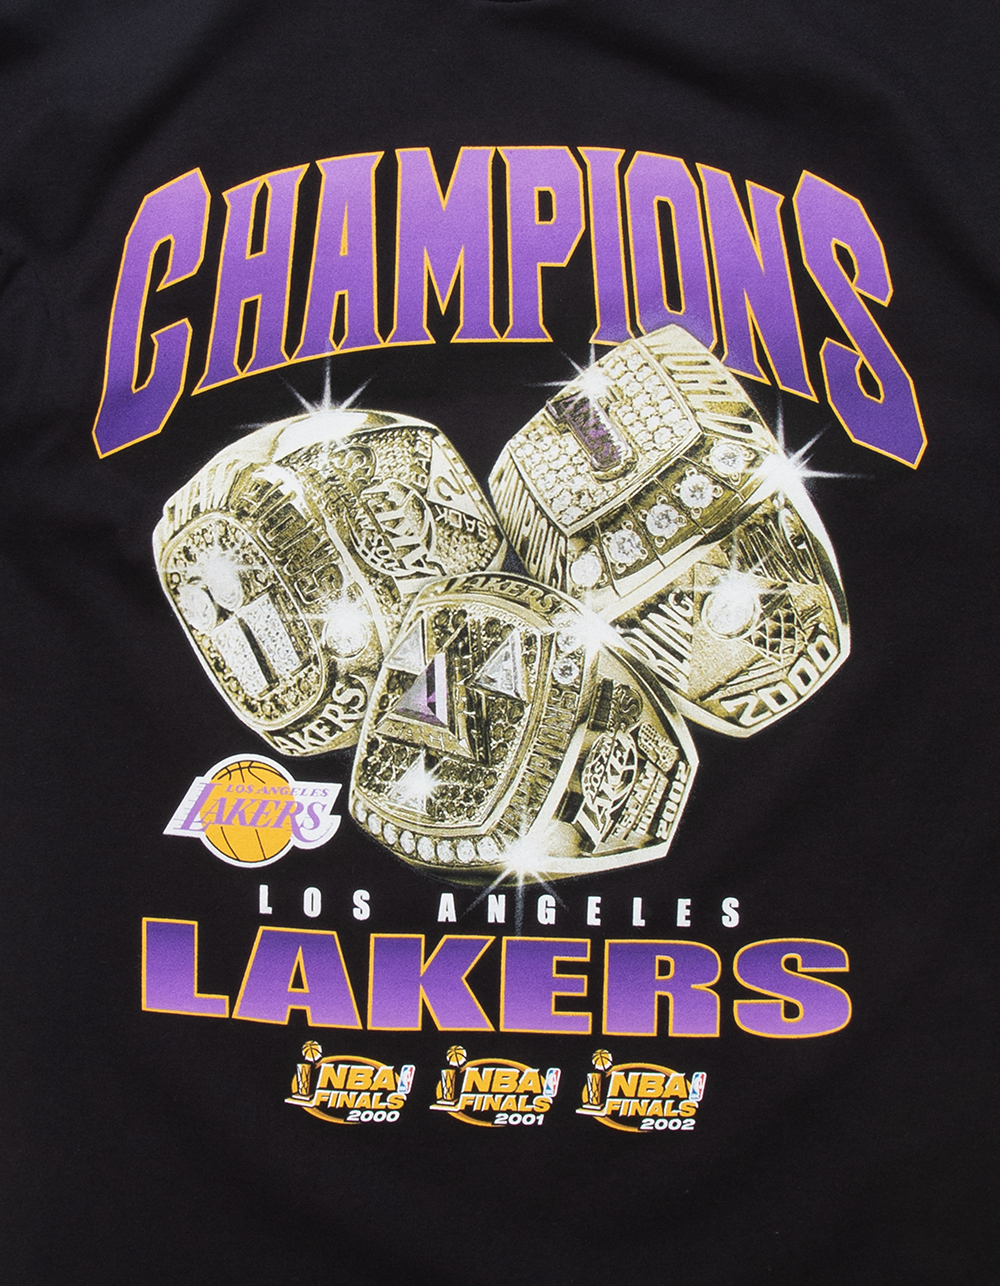 Los Angeles Lakers Lithograph print of Laker Championships with